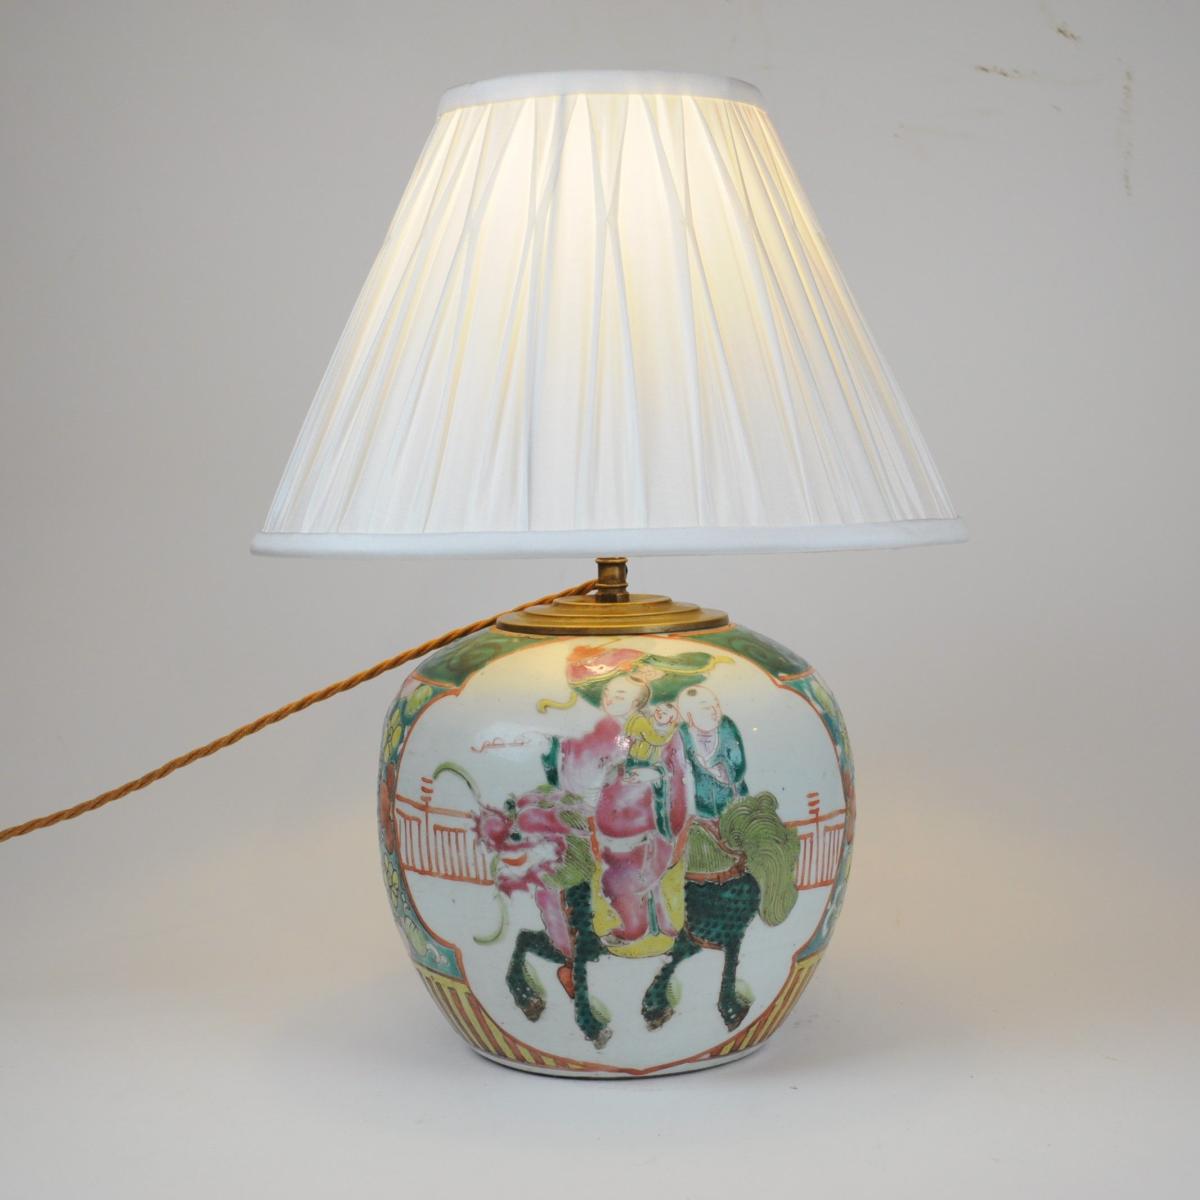 Chinese Polychrome Table Lamp